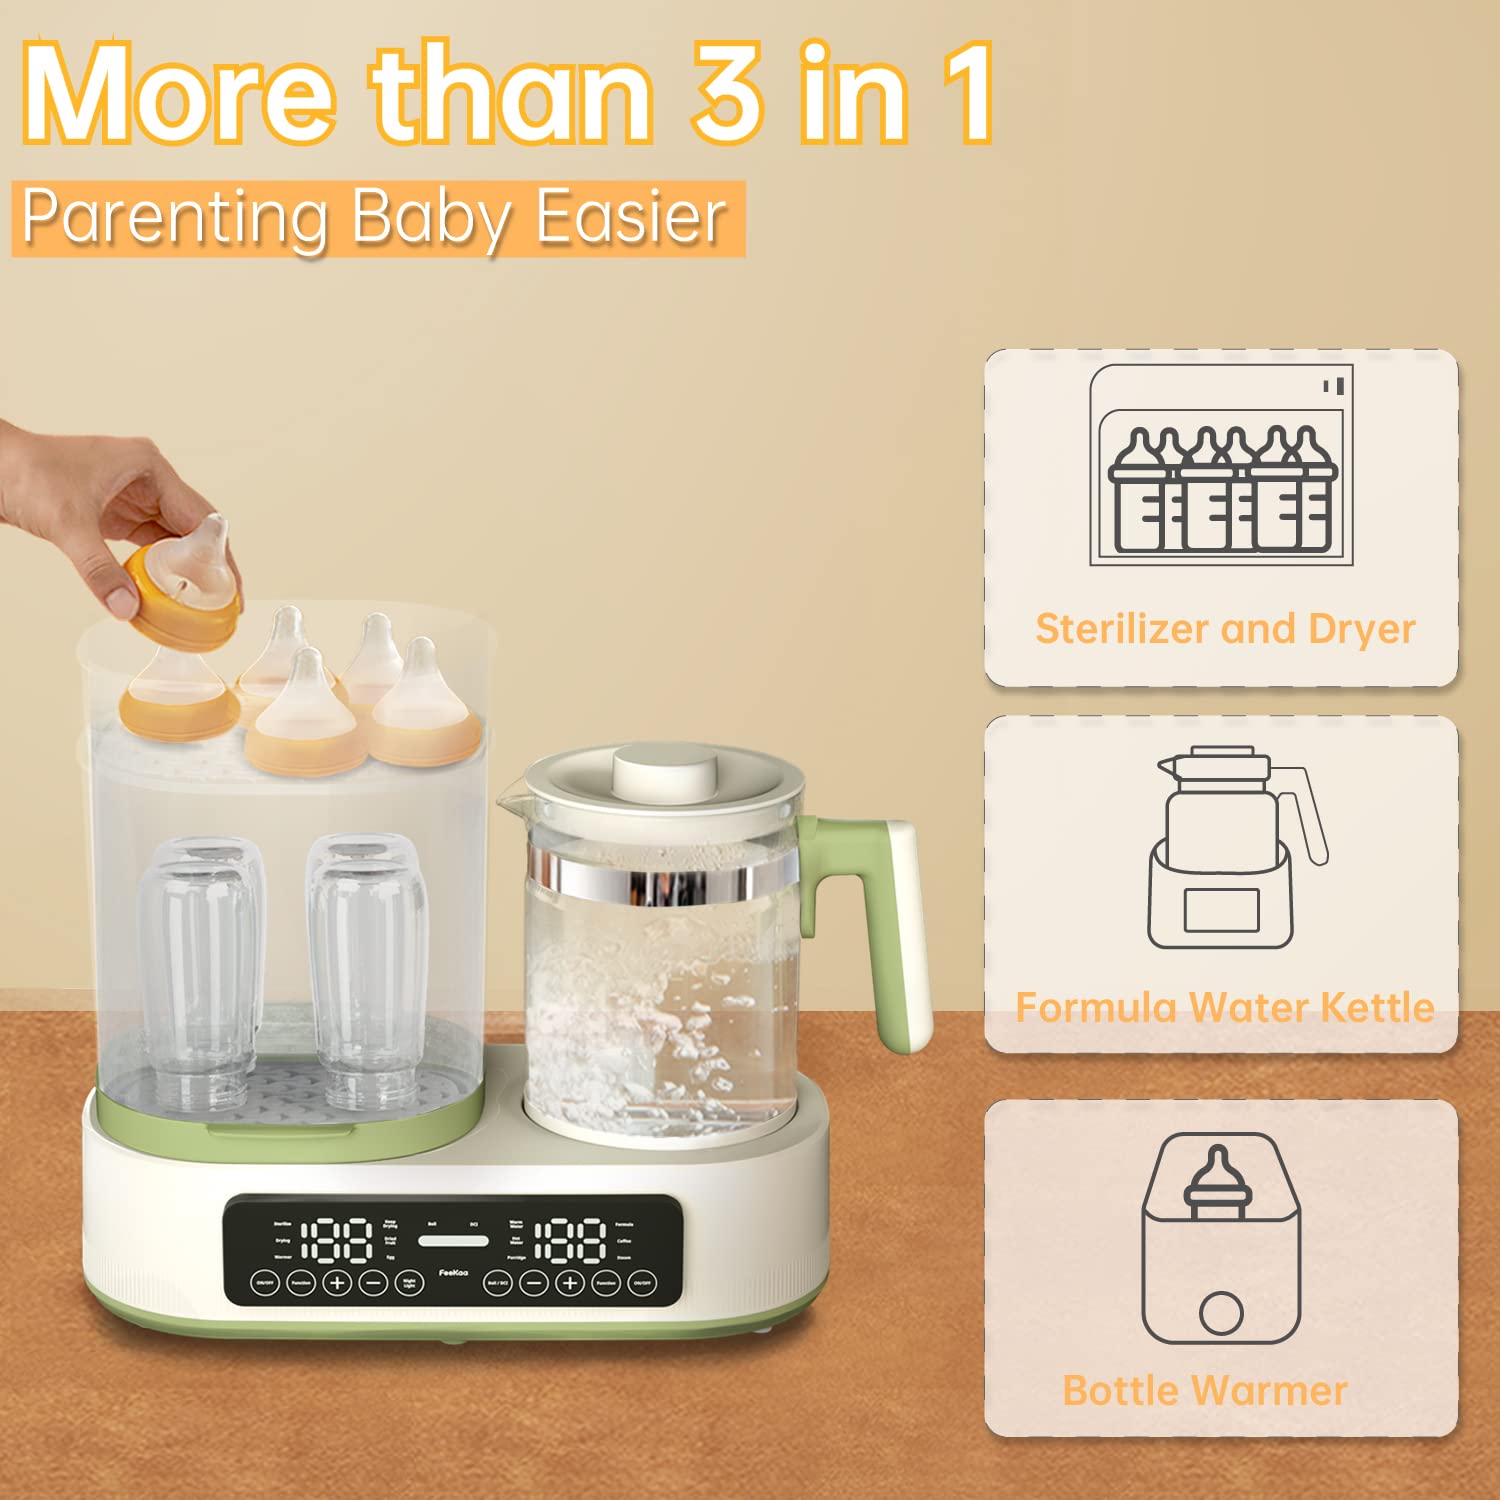 Feekaa Baby Bottle Warmer for Breastmilk,Multifunctional Bottle Steamer and Dryer, Bottle Maker Formula Machine with 44 oz Electric Baby Kettle, Water Warmer for Baby Formula,Temperature Control (±1℃)